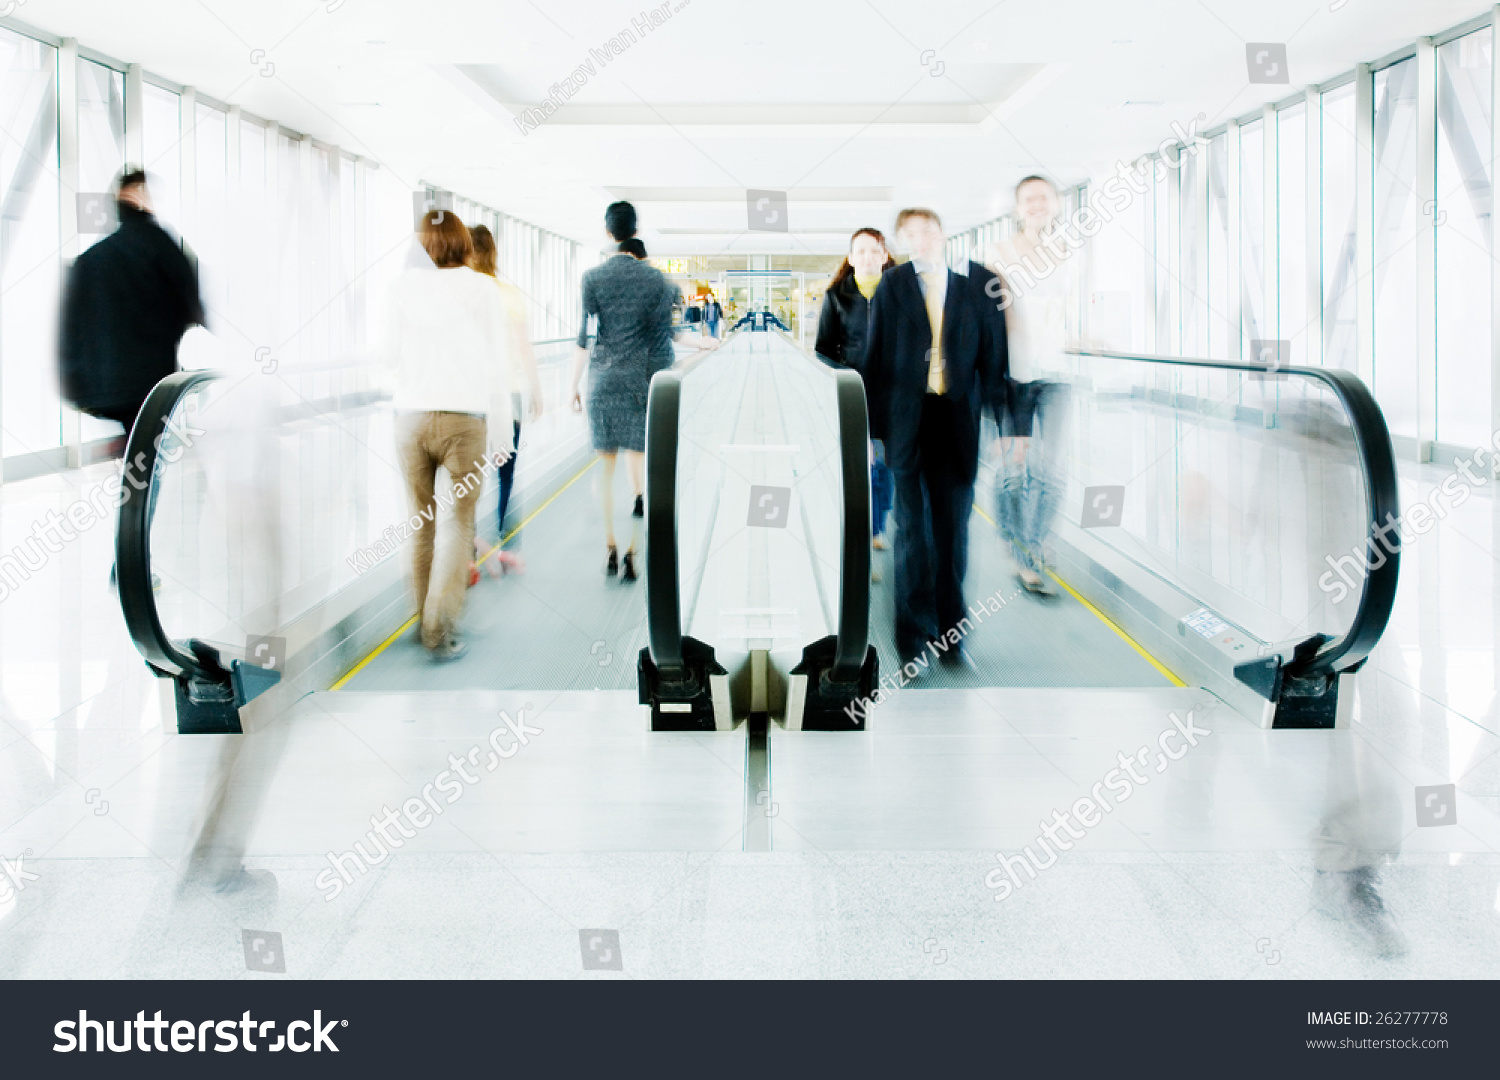 Moving Crowd In A Corridor Stock Photo 26277778 : Shutterstock